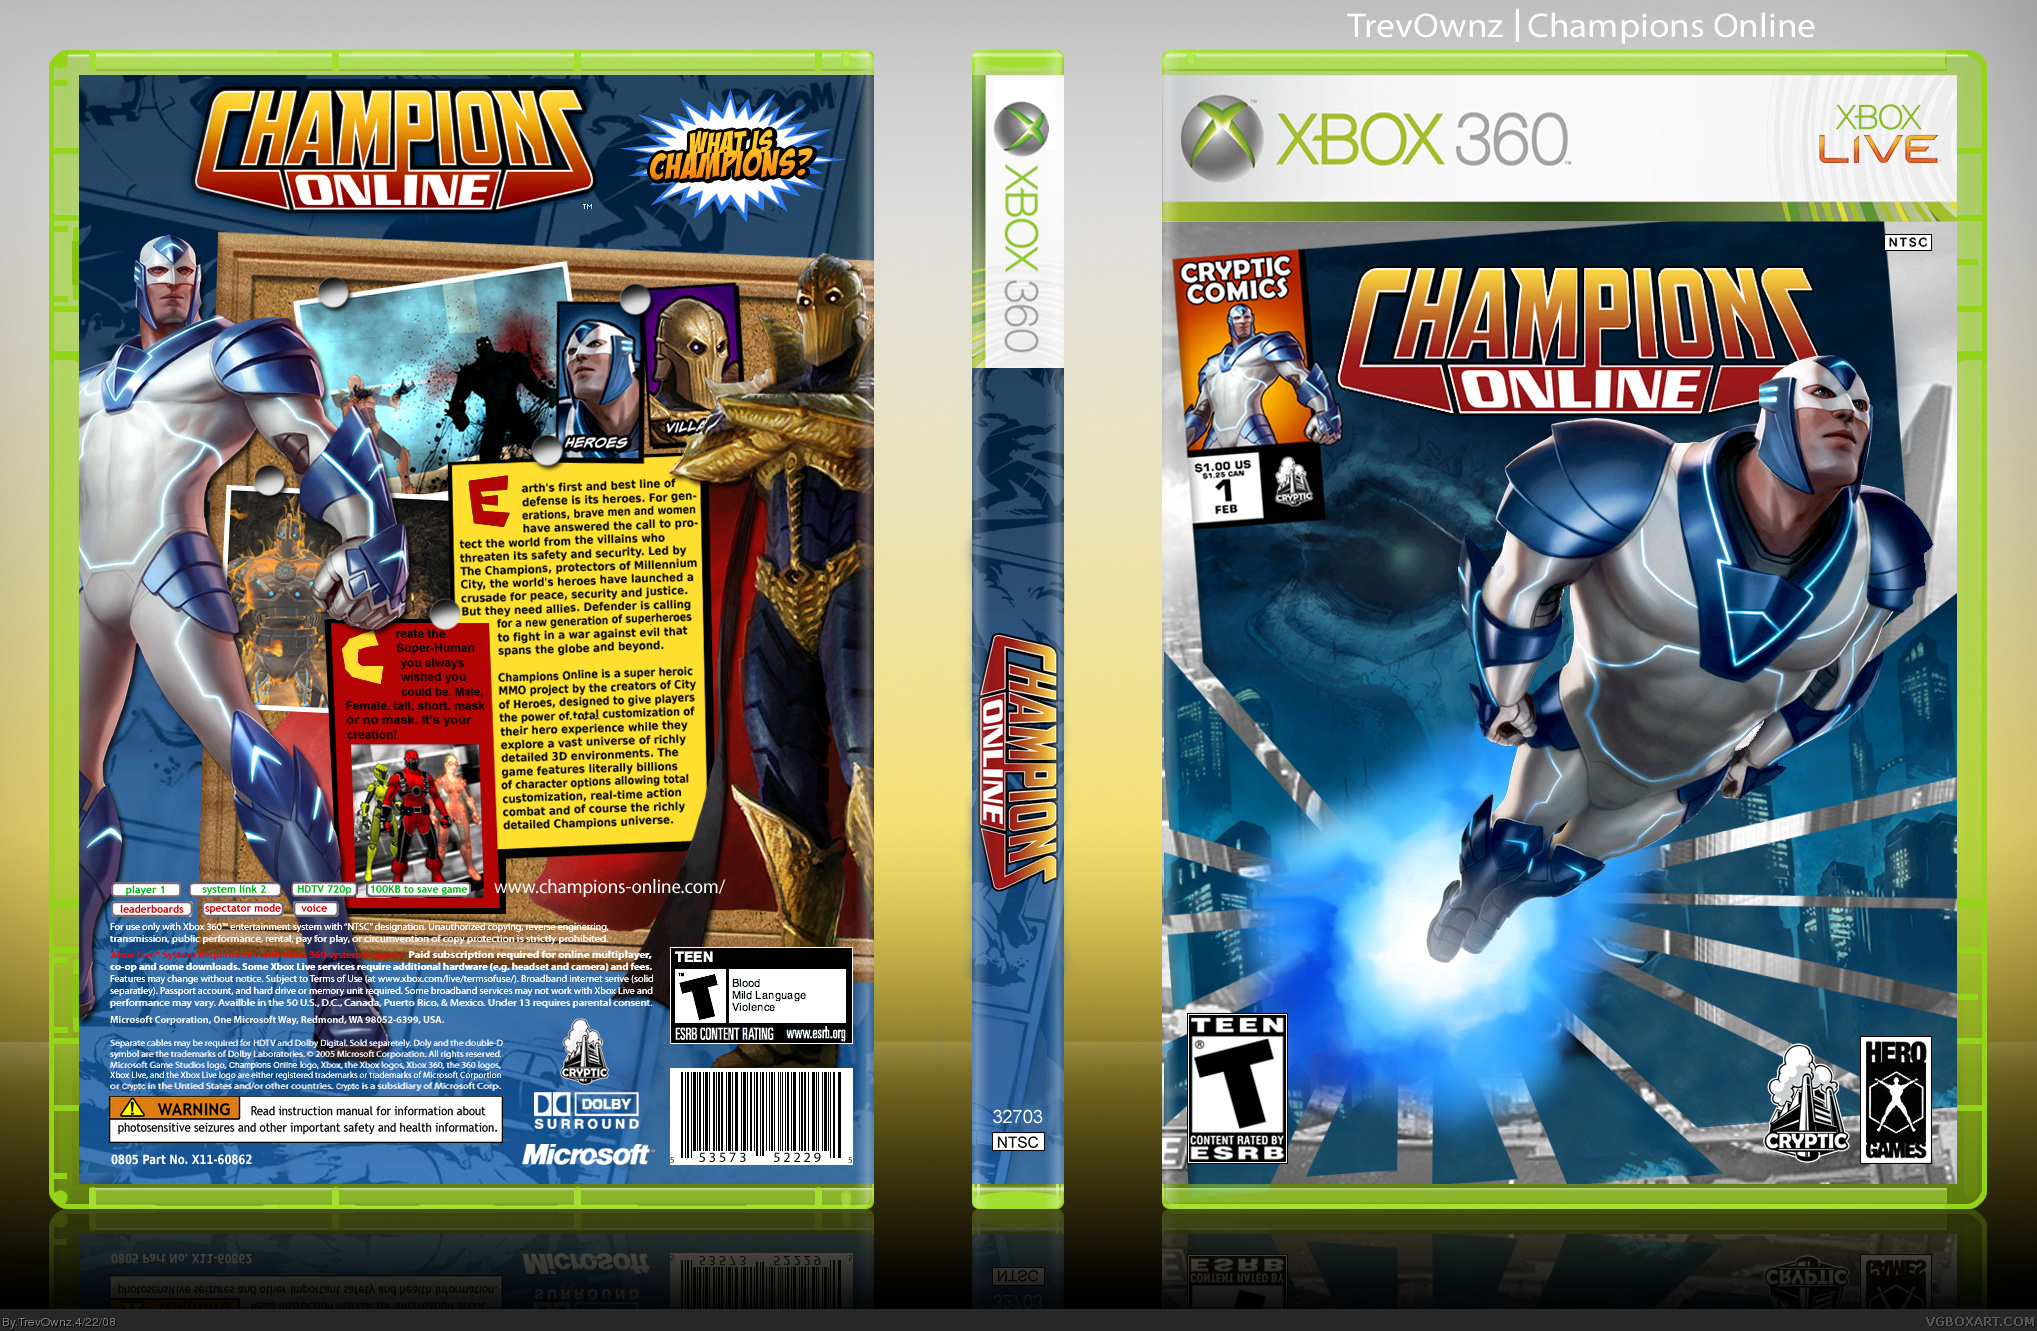 Viewing full size Champions Online box cover